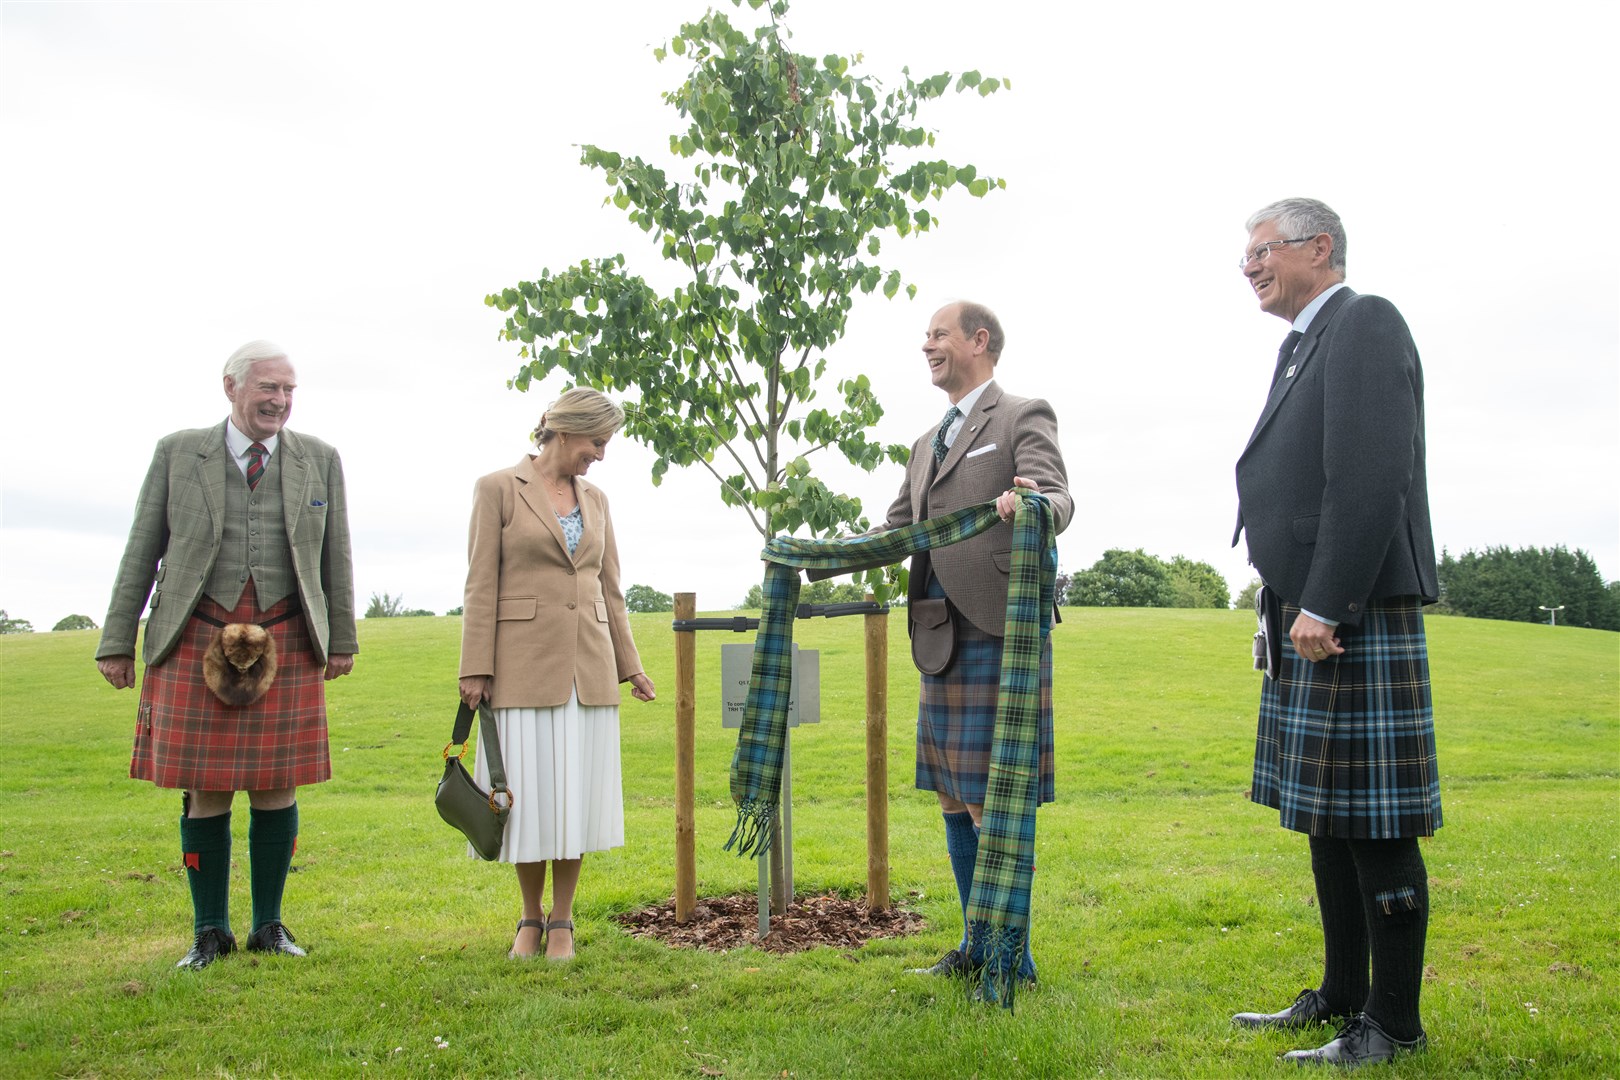 The Earl and Countess of Wessex and Forfar unveil a plaque for the Queen's Green Canopy in Elgin's Cooper Park as they are joined by Lord Lieutenant of Moray Seymour Monro (left) and Lord Lieutenant of Banffshire Andrew Simpson (right). Picture: Daniel Forsyth